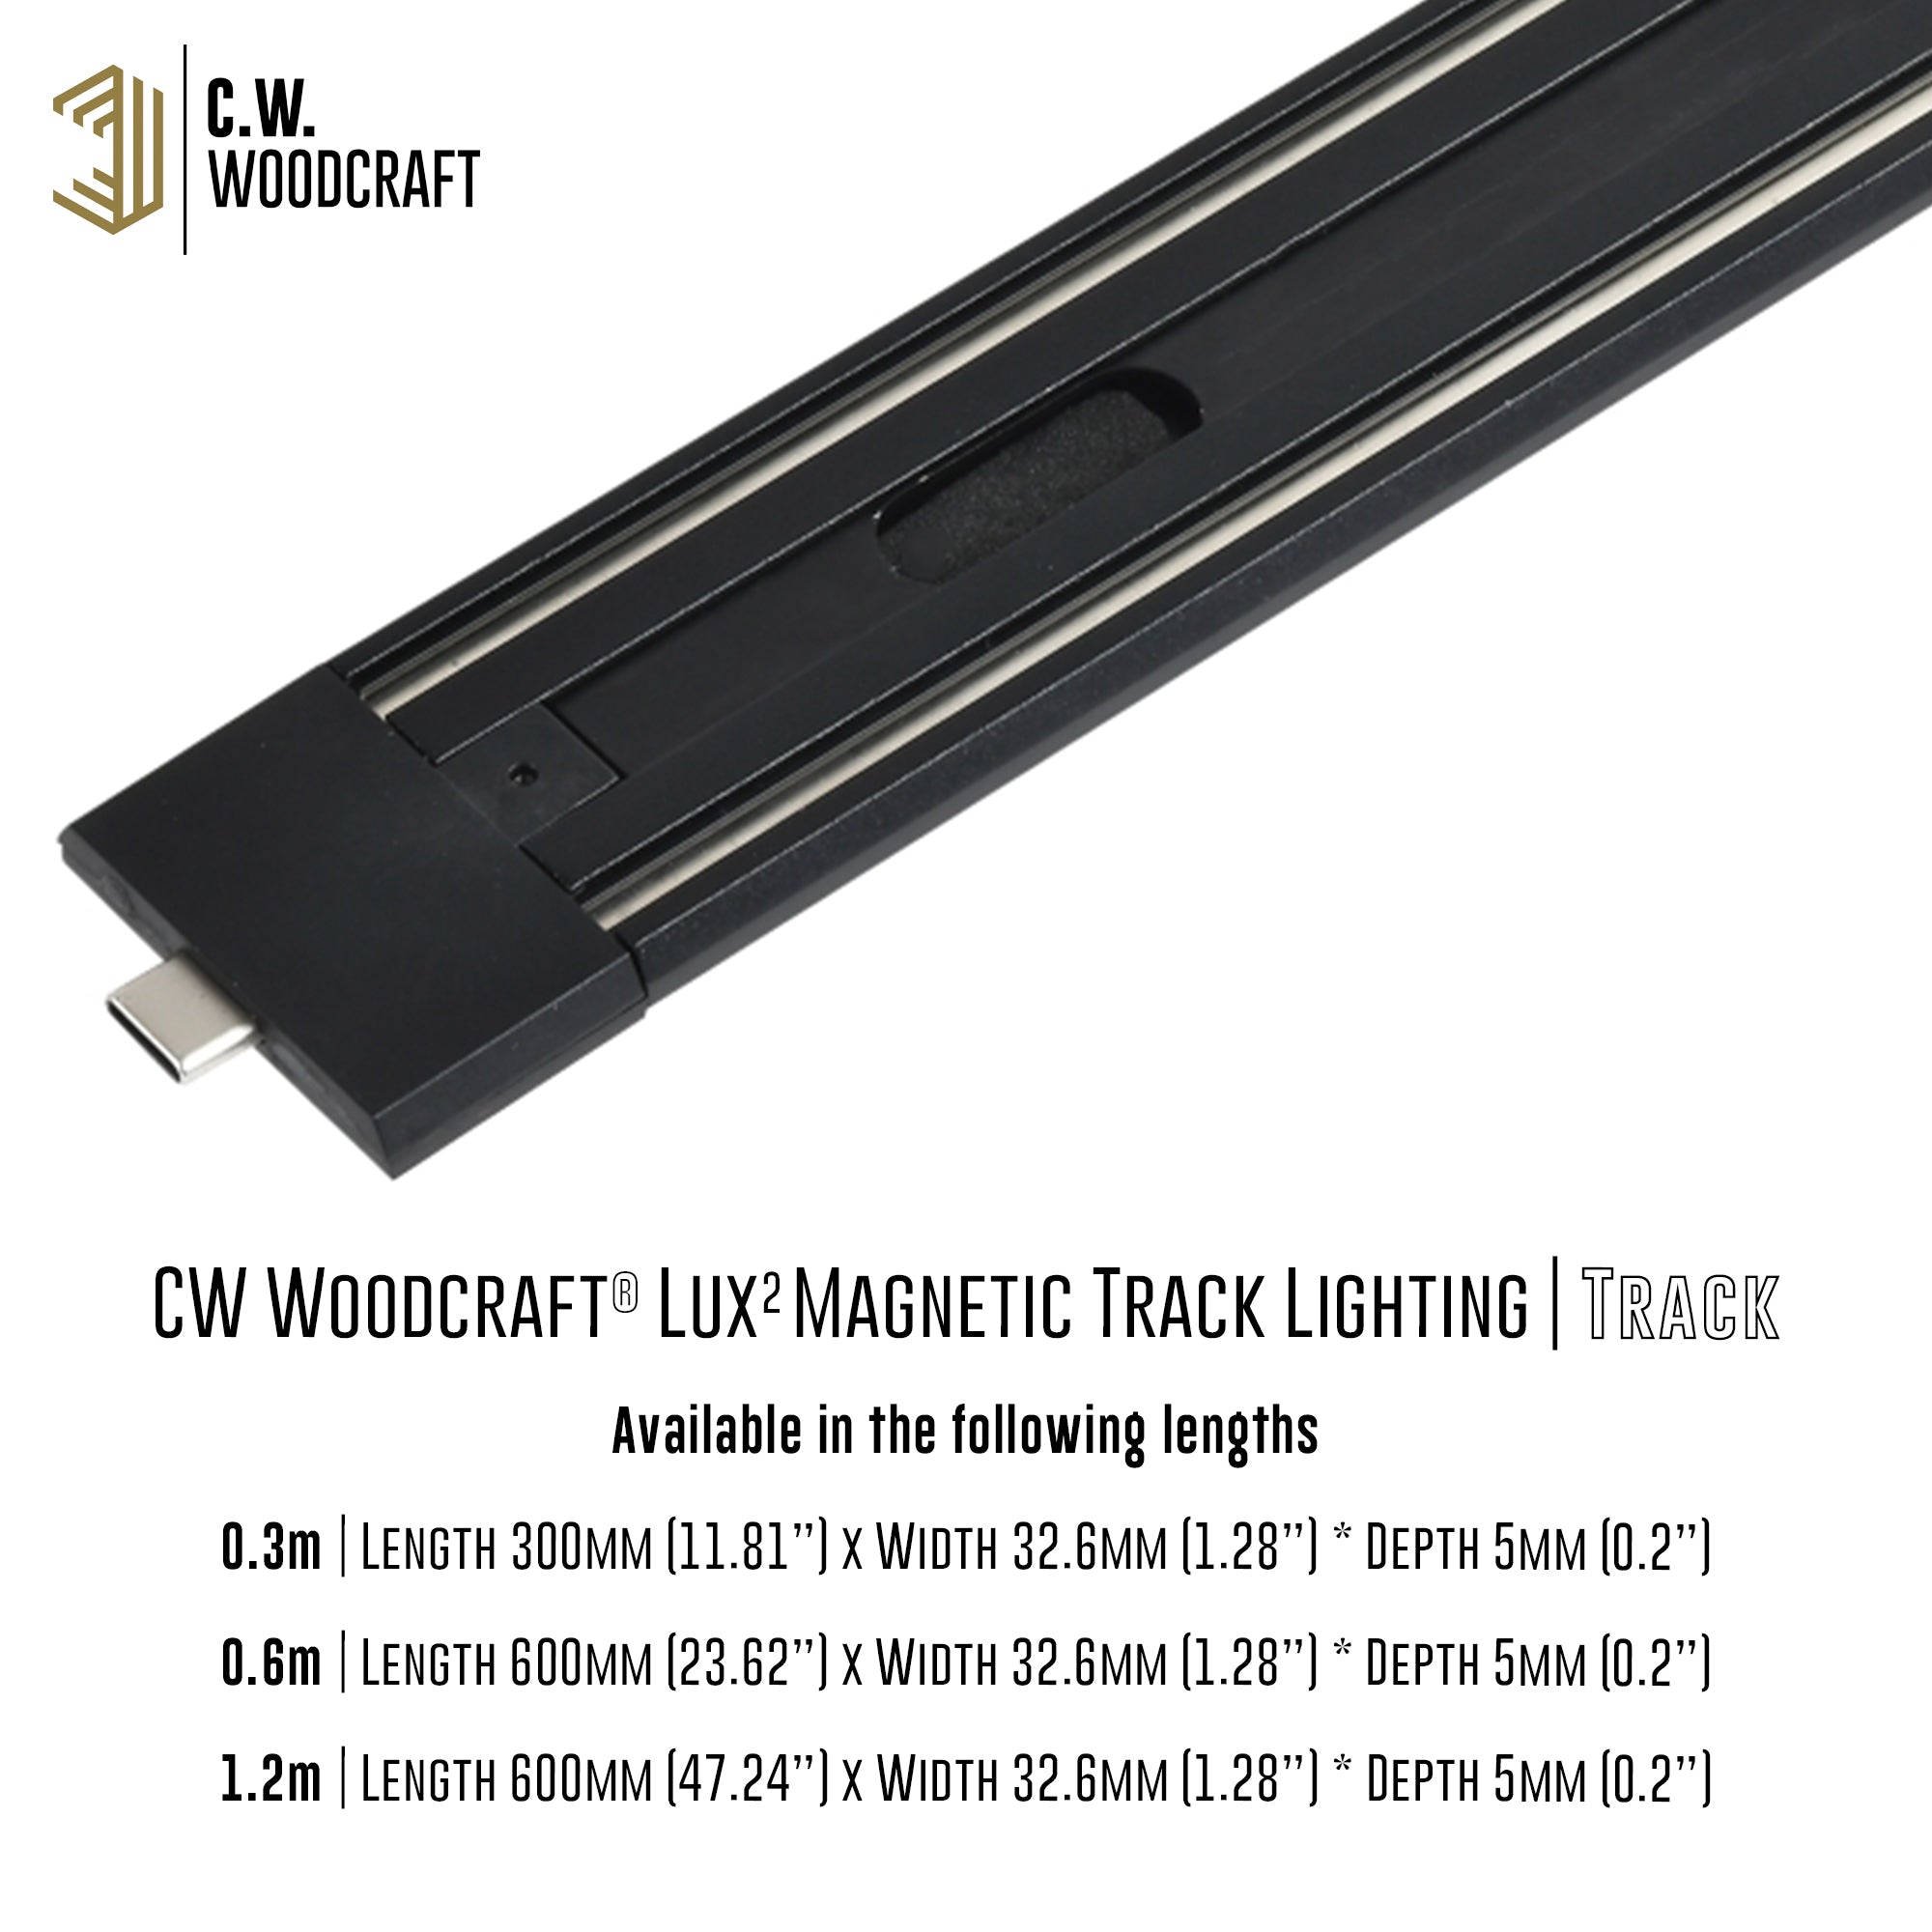 LUX 2 MAGNETIC LIGHTING SYSTEM | Track